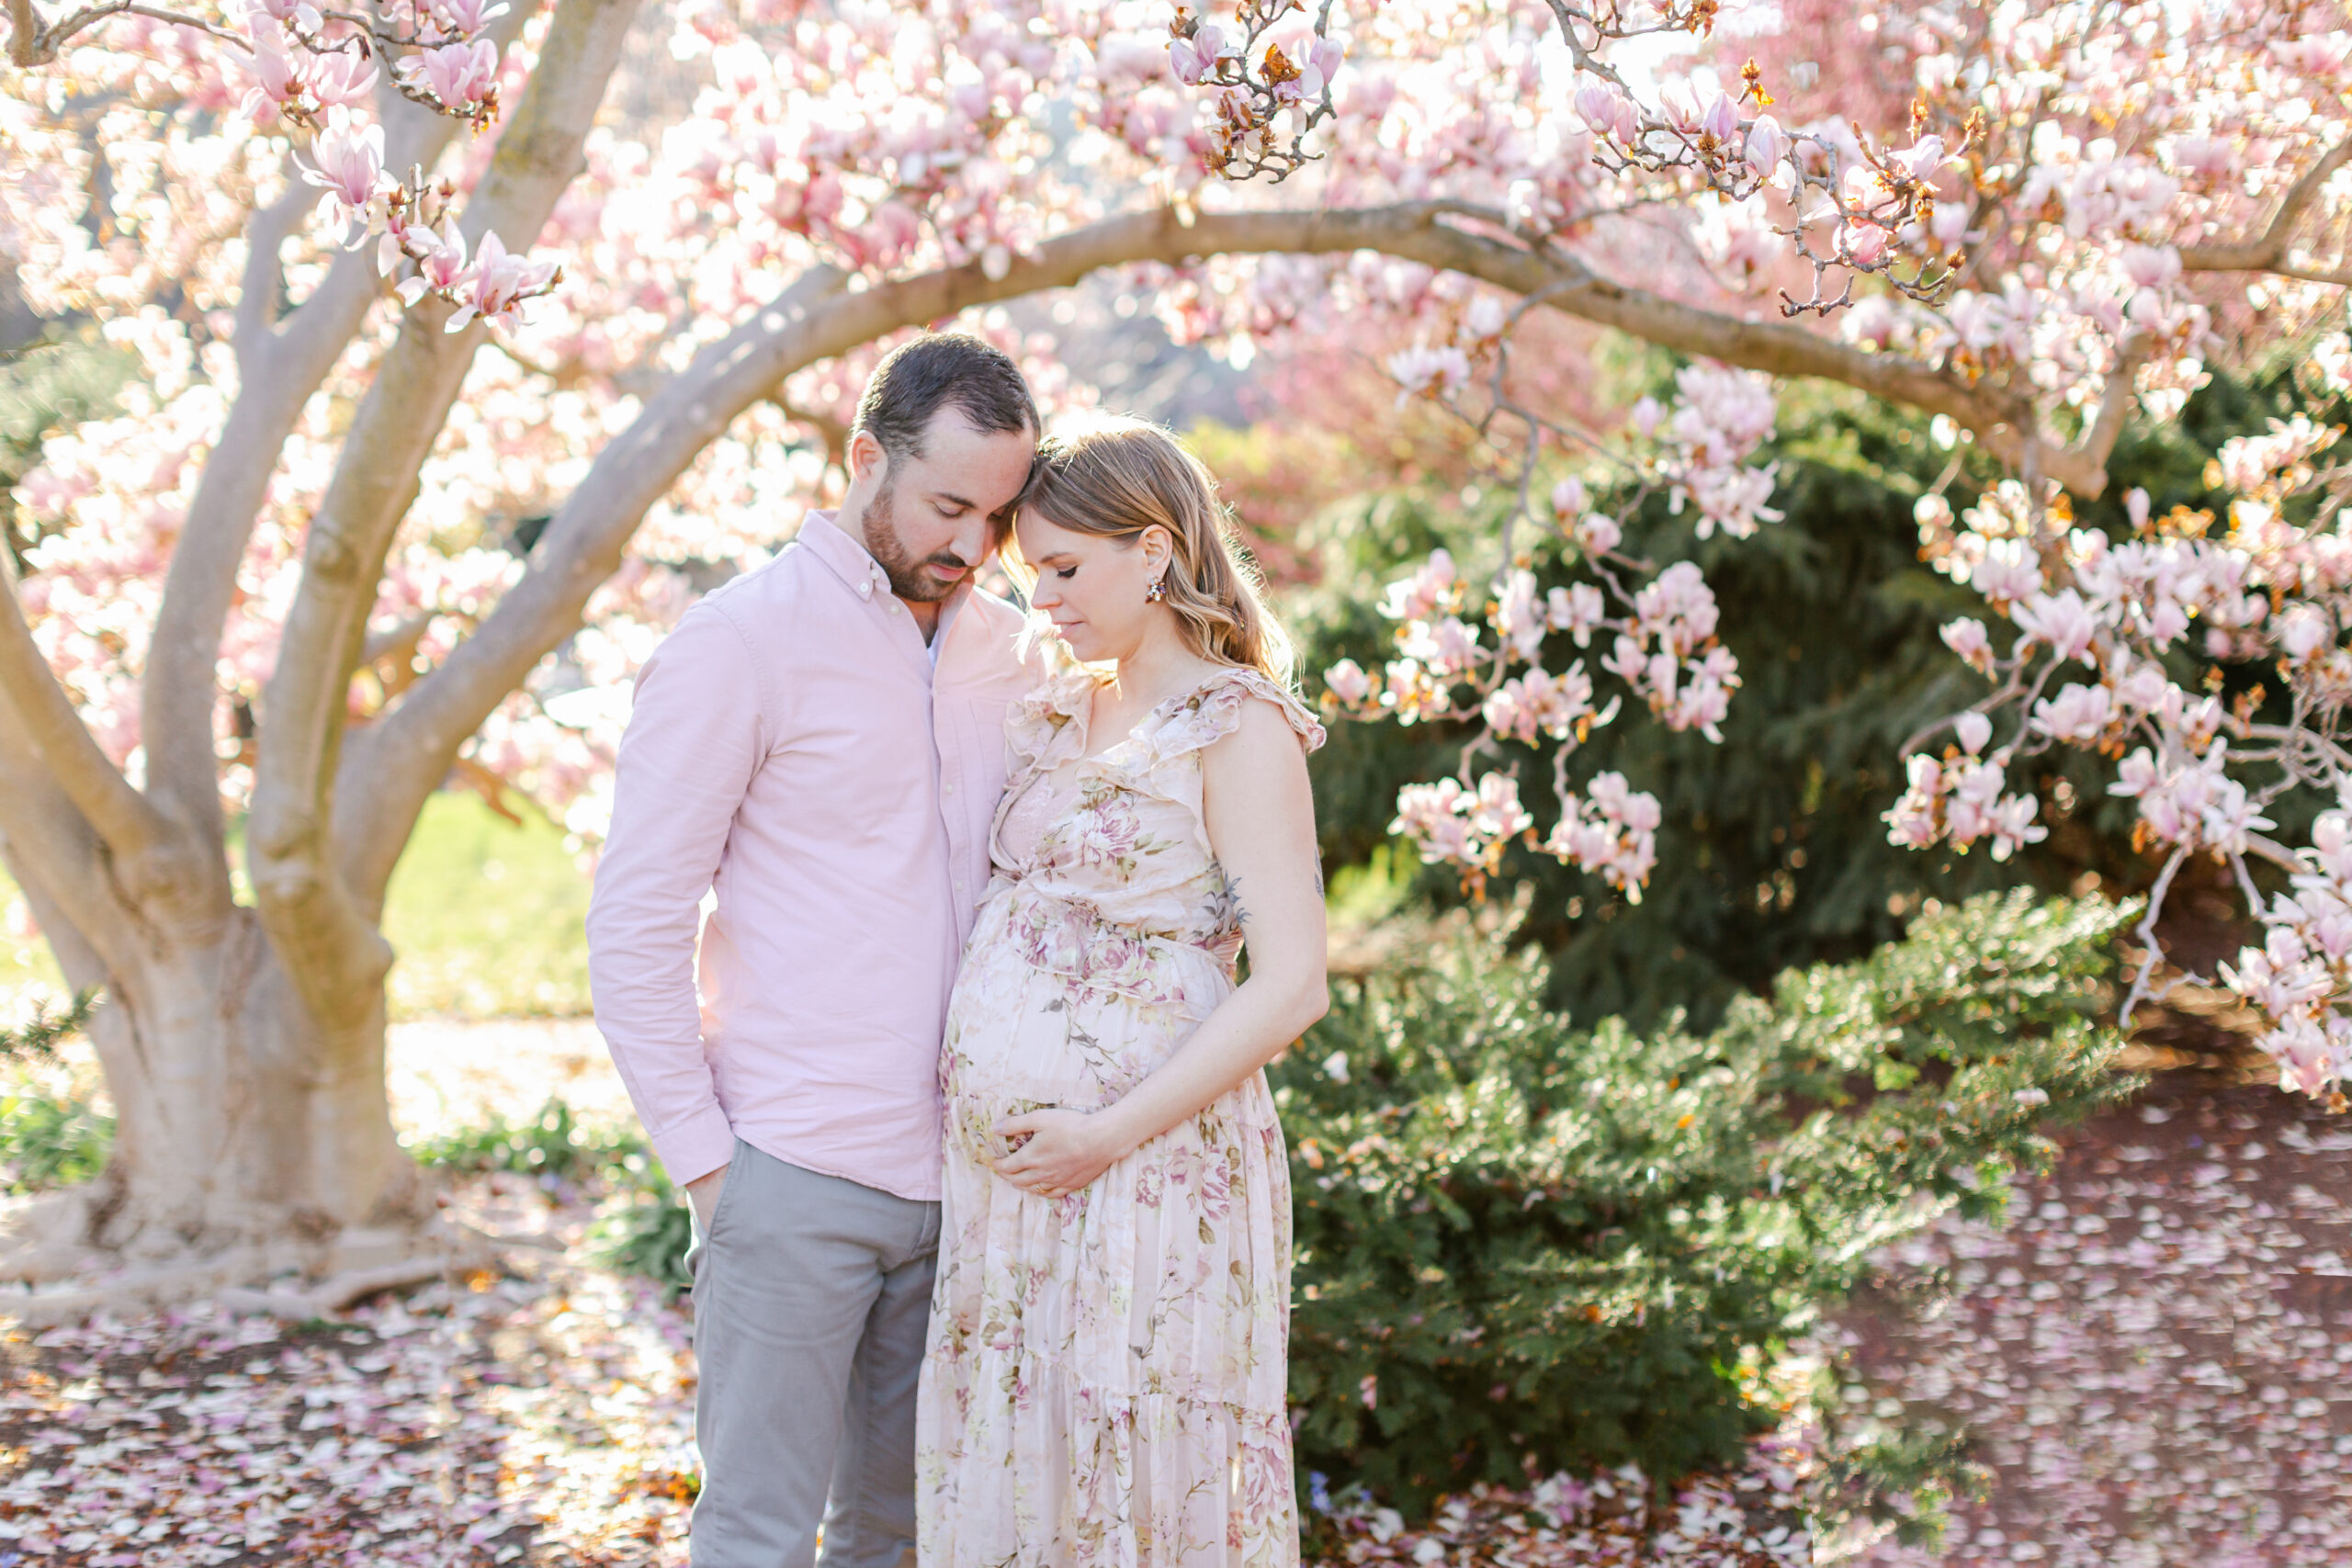 Expecting couple in garden with pink blooms